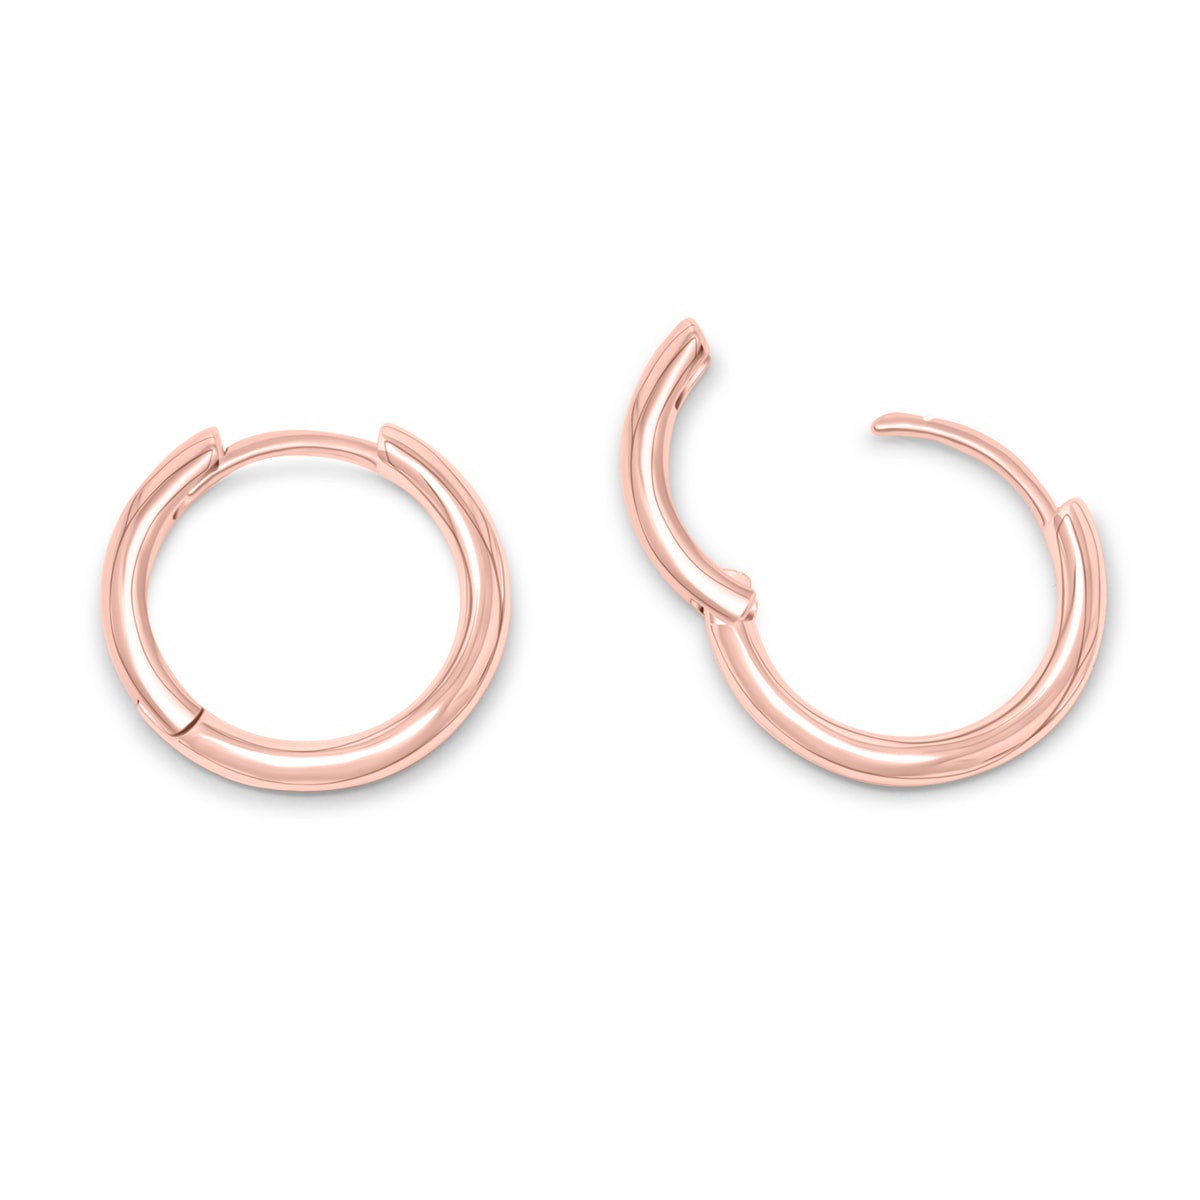 Small affordable rose gold hoop earrings